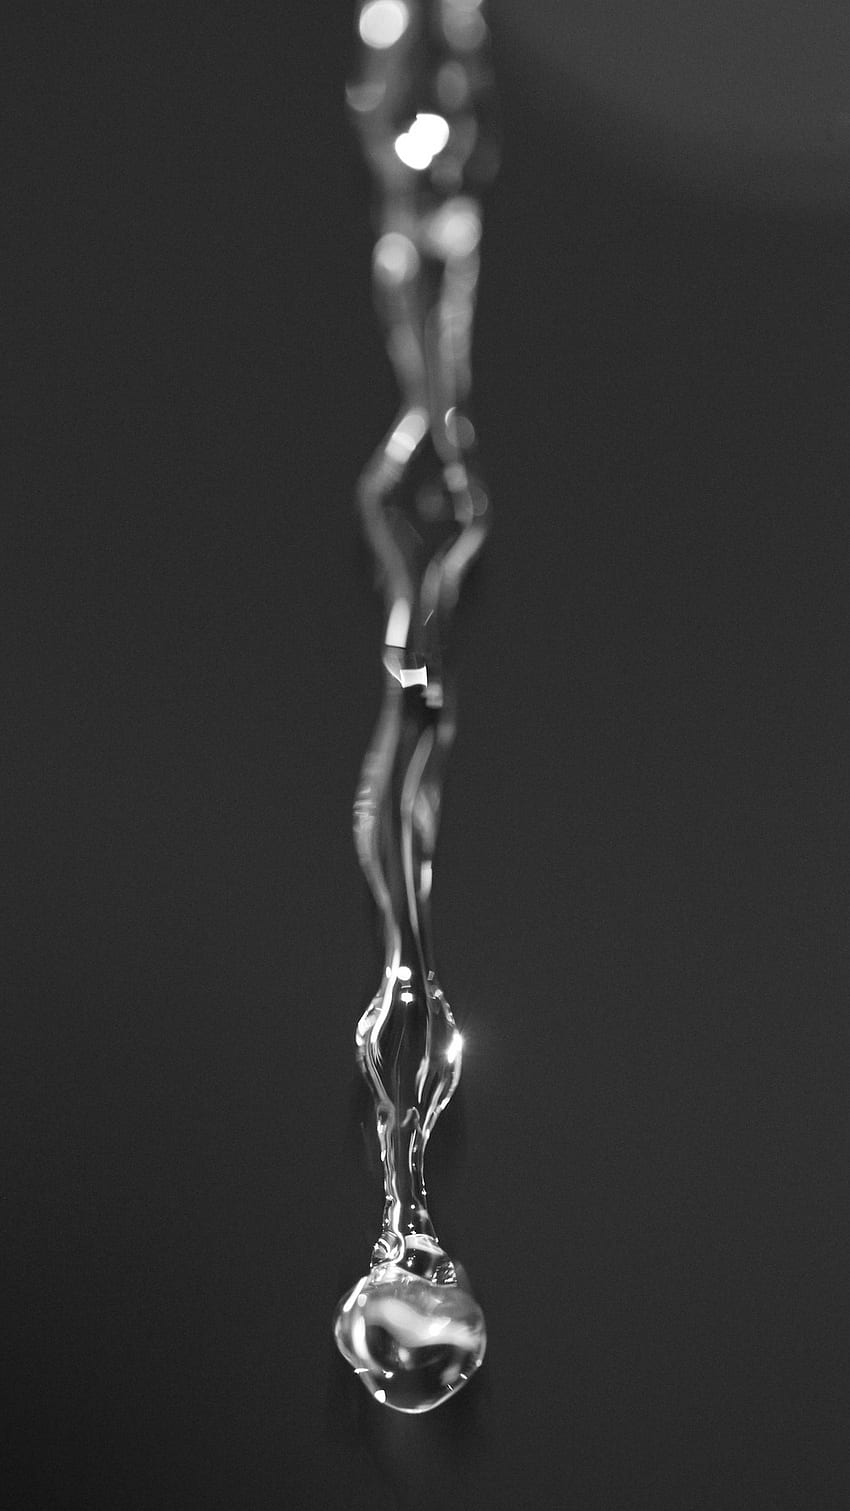 Water Drop Free Photo Download | FreeImages